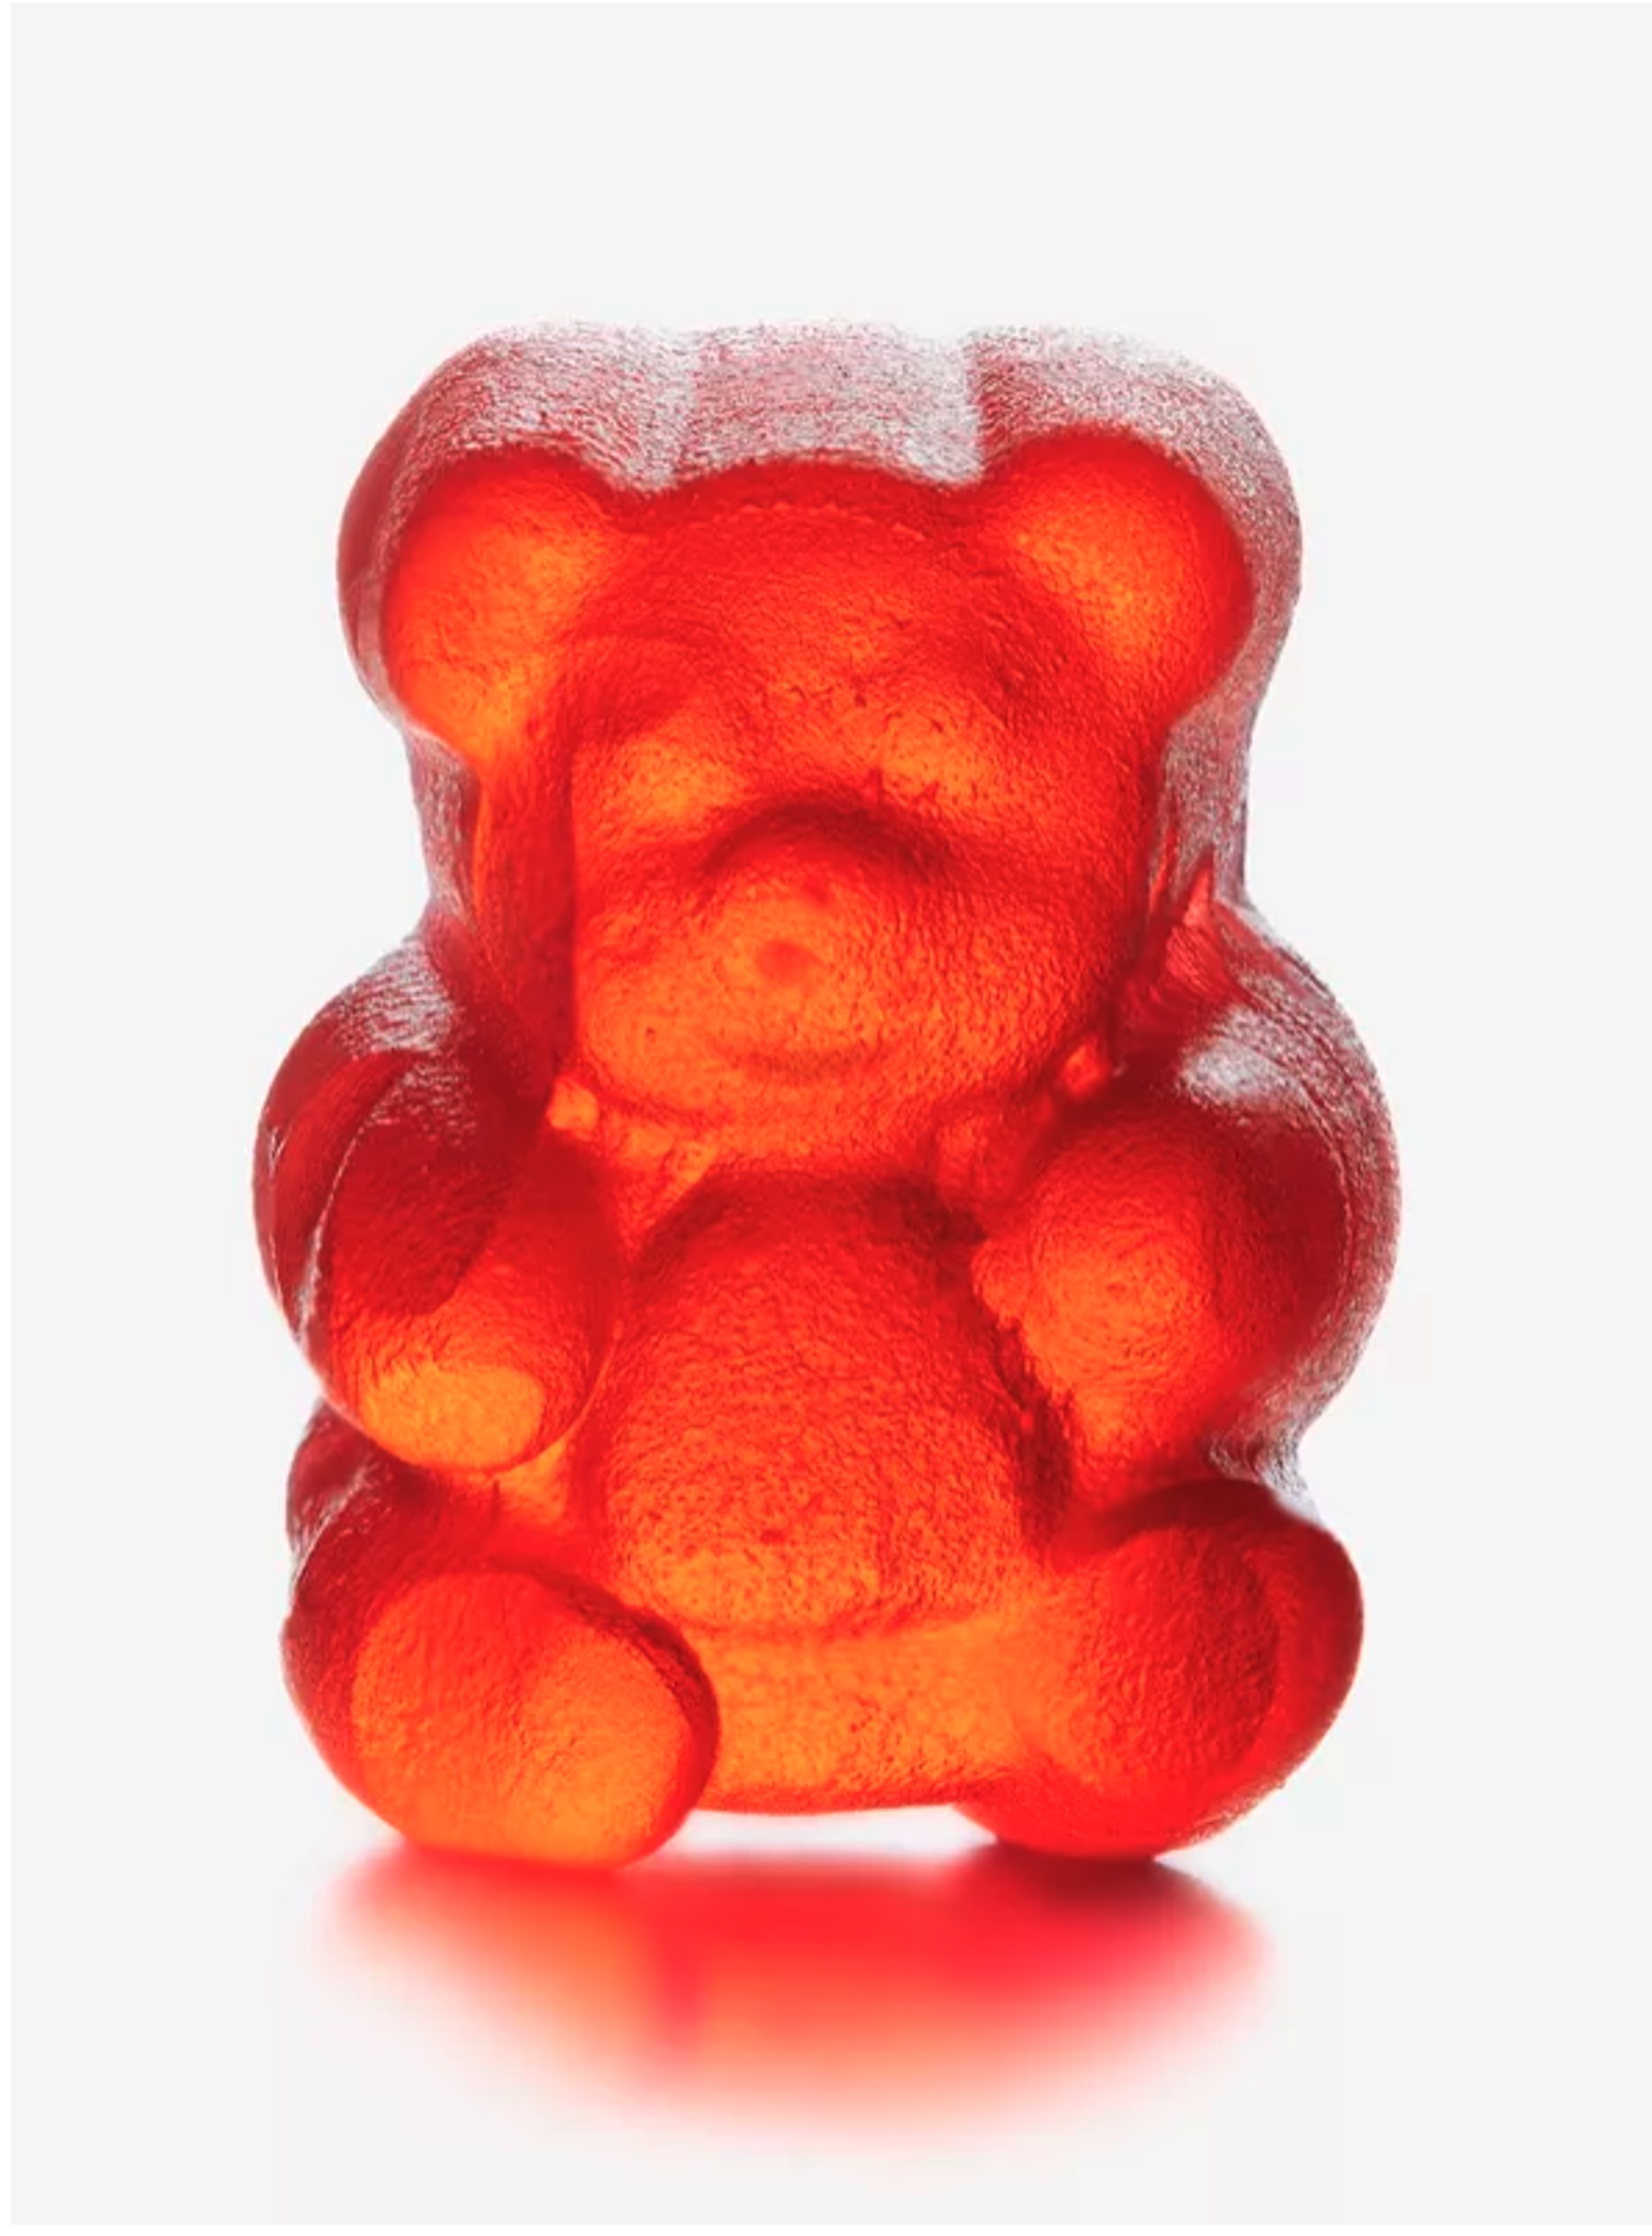 Red Gummy Bear by Peter Andrew Lusztyk / Refined Sugar